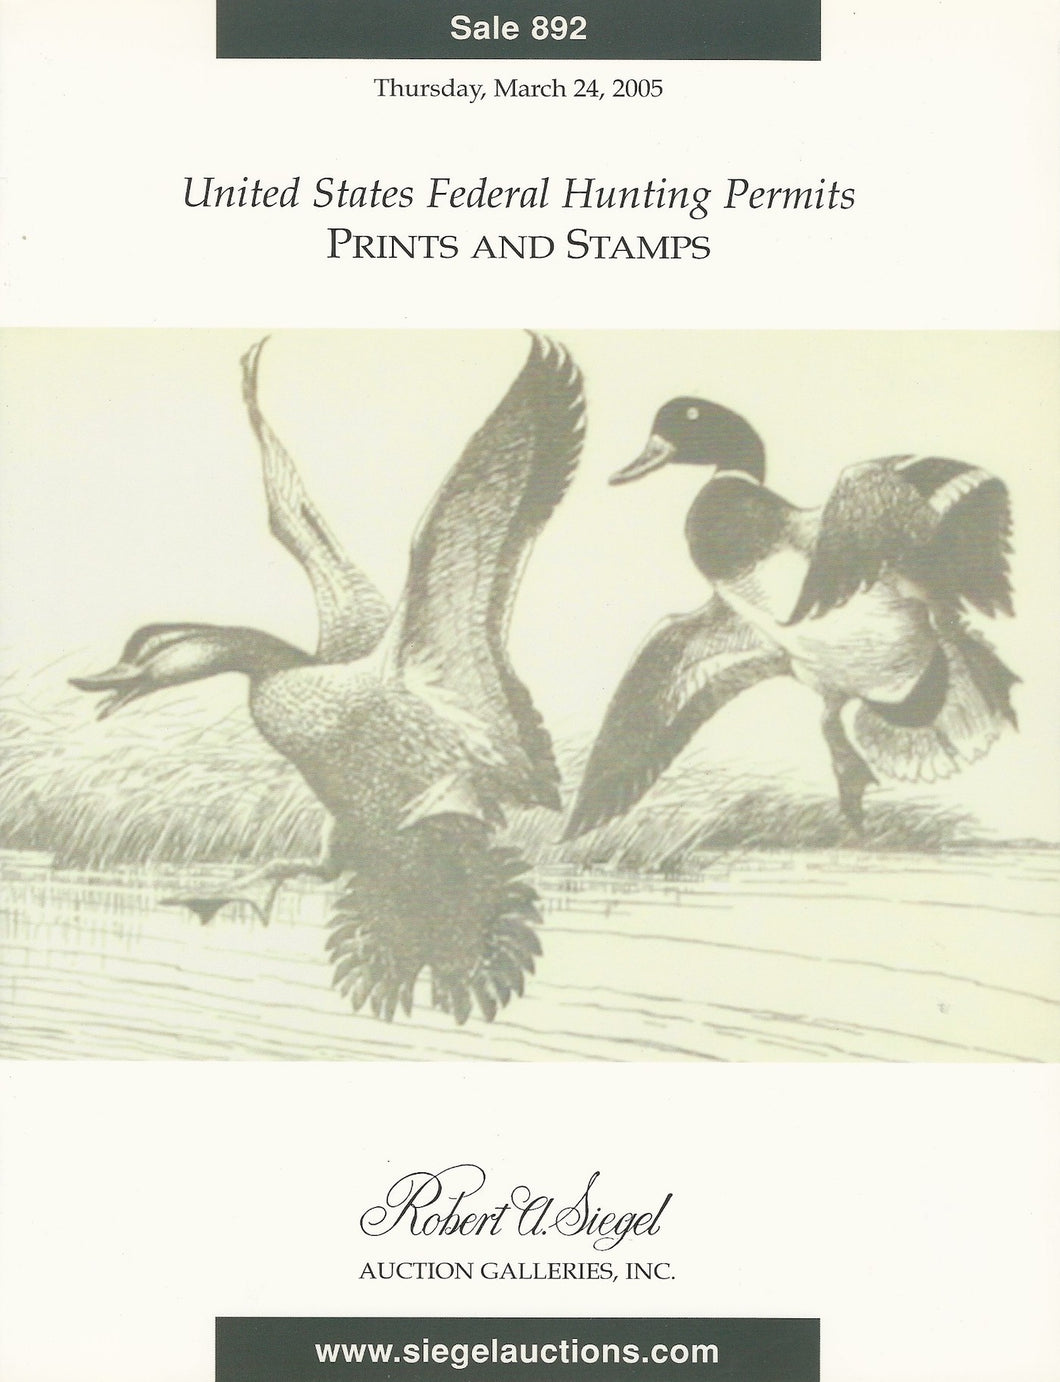 United States Federal Hunting Permits - Prints and Stamps, Robert A. Siegel Auction Galleries, Sale 892, March 24, 2005